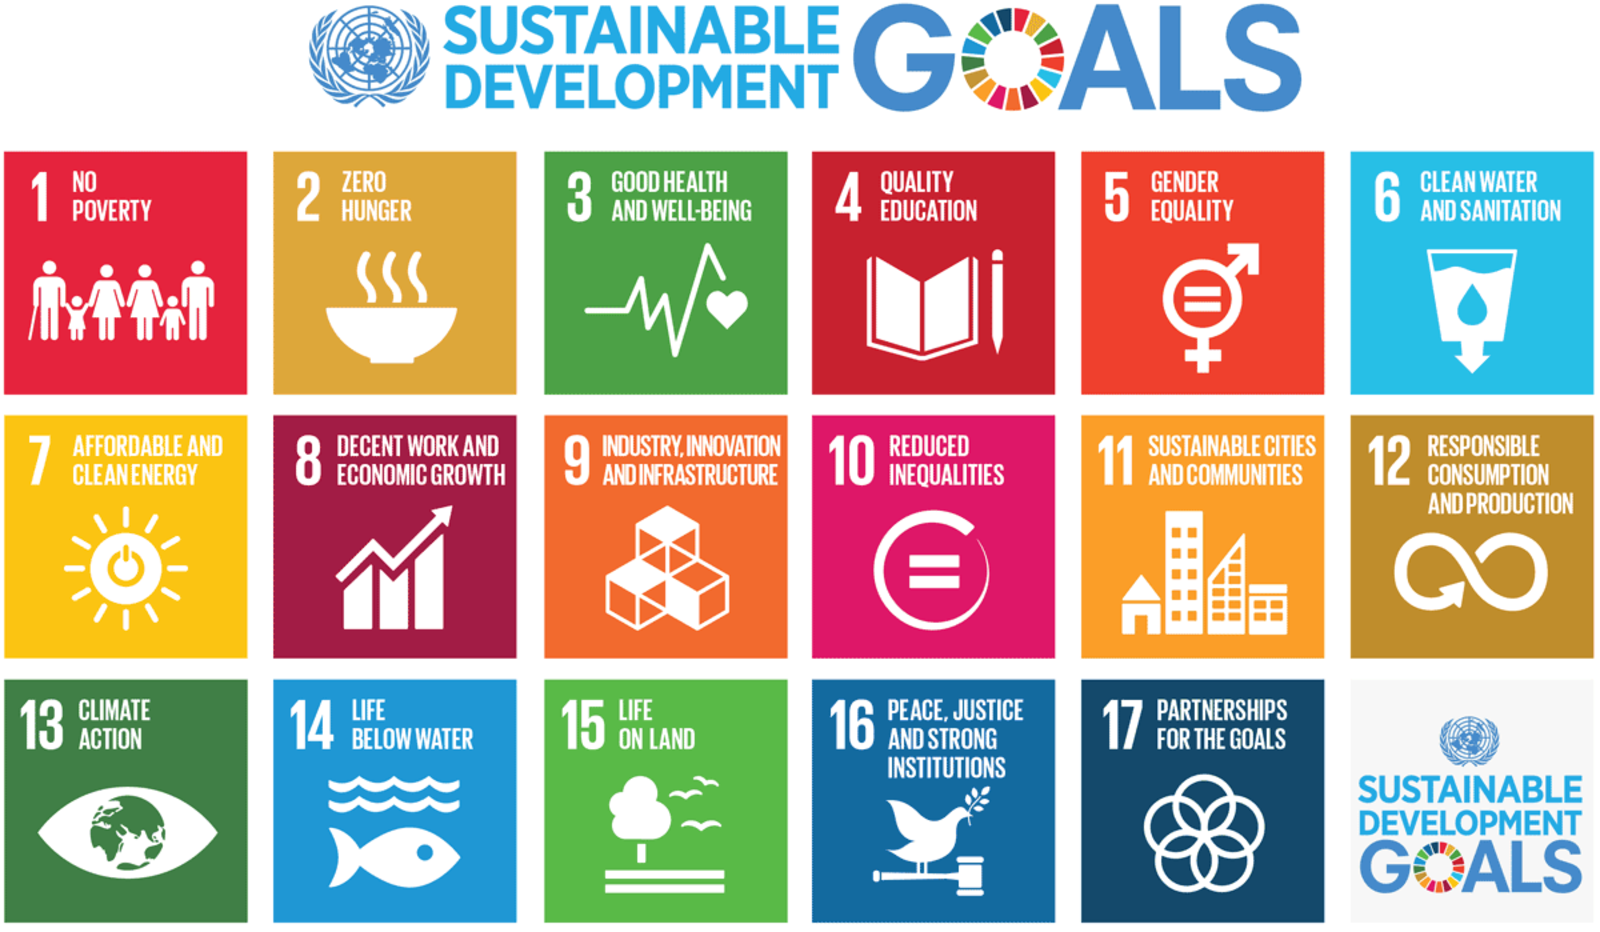 Sustainable Development Goals infographic from the UN